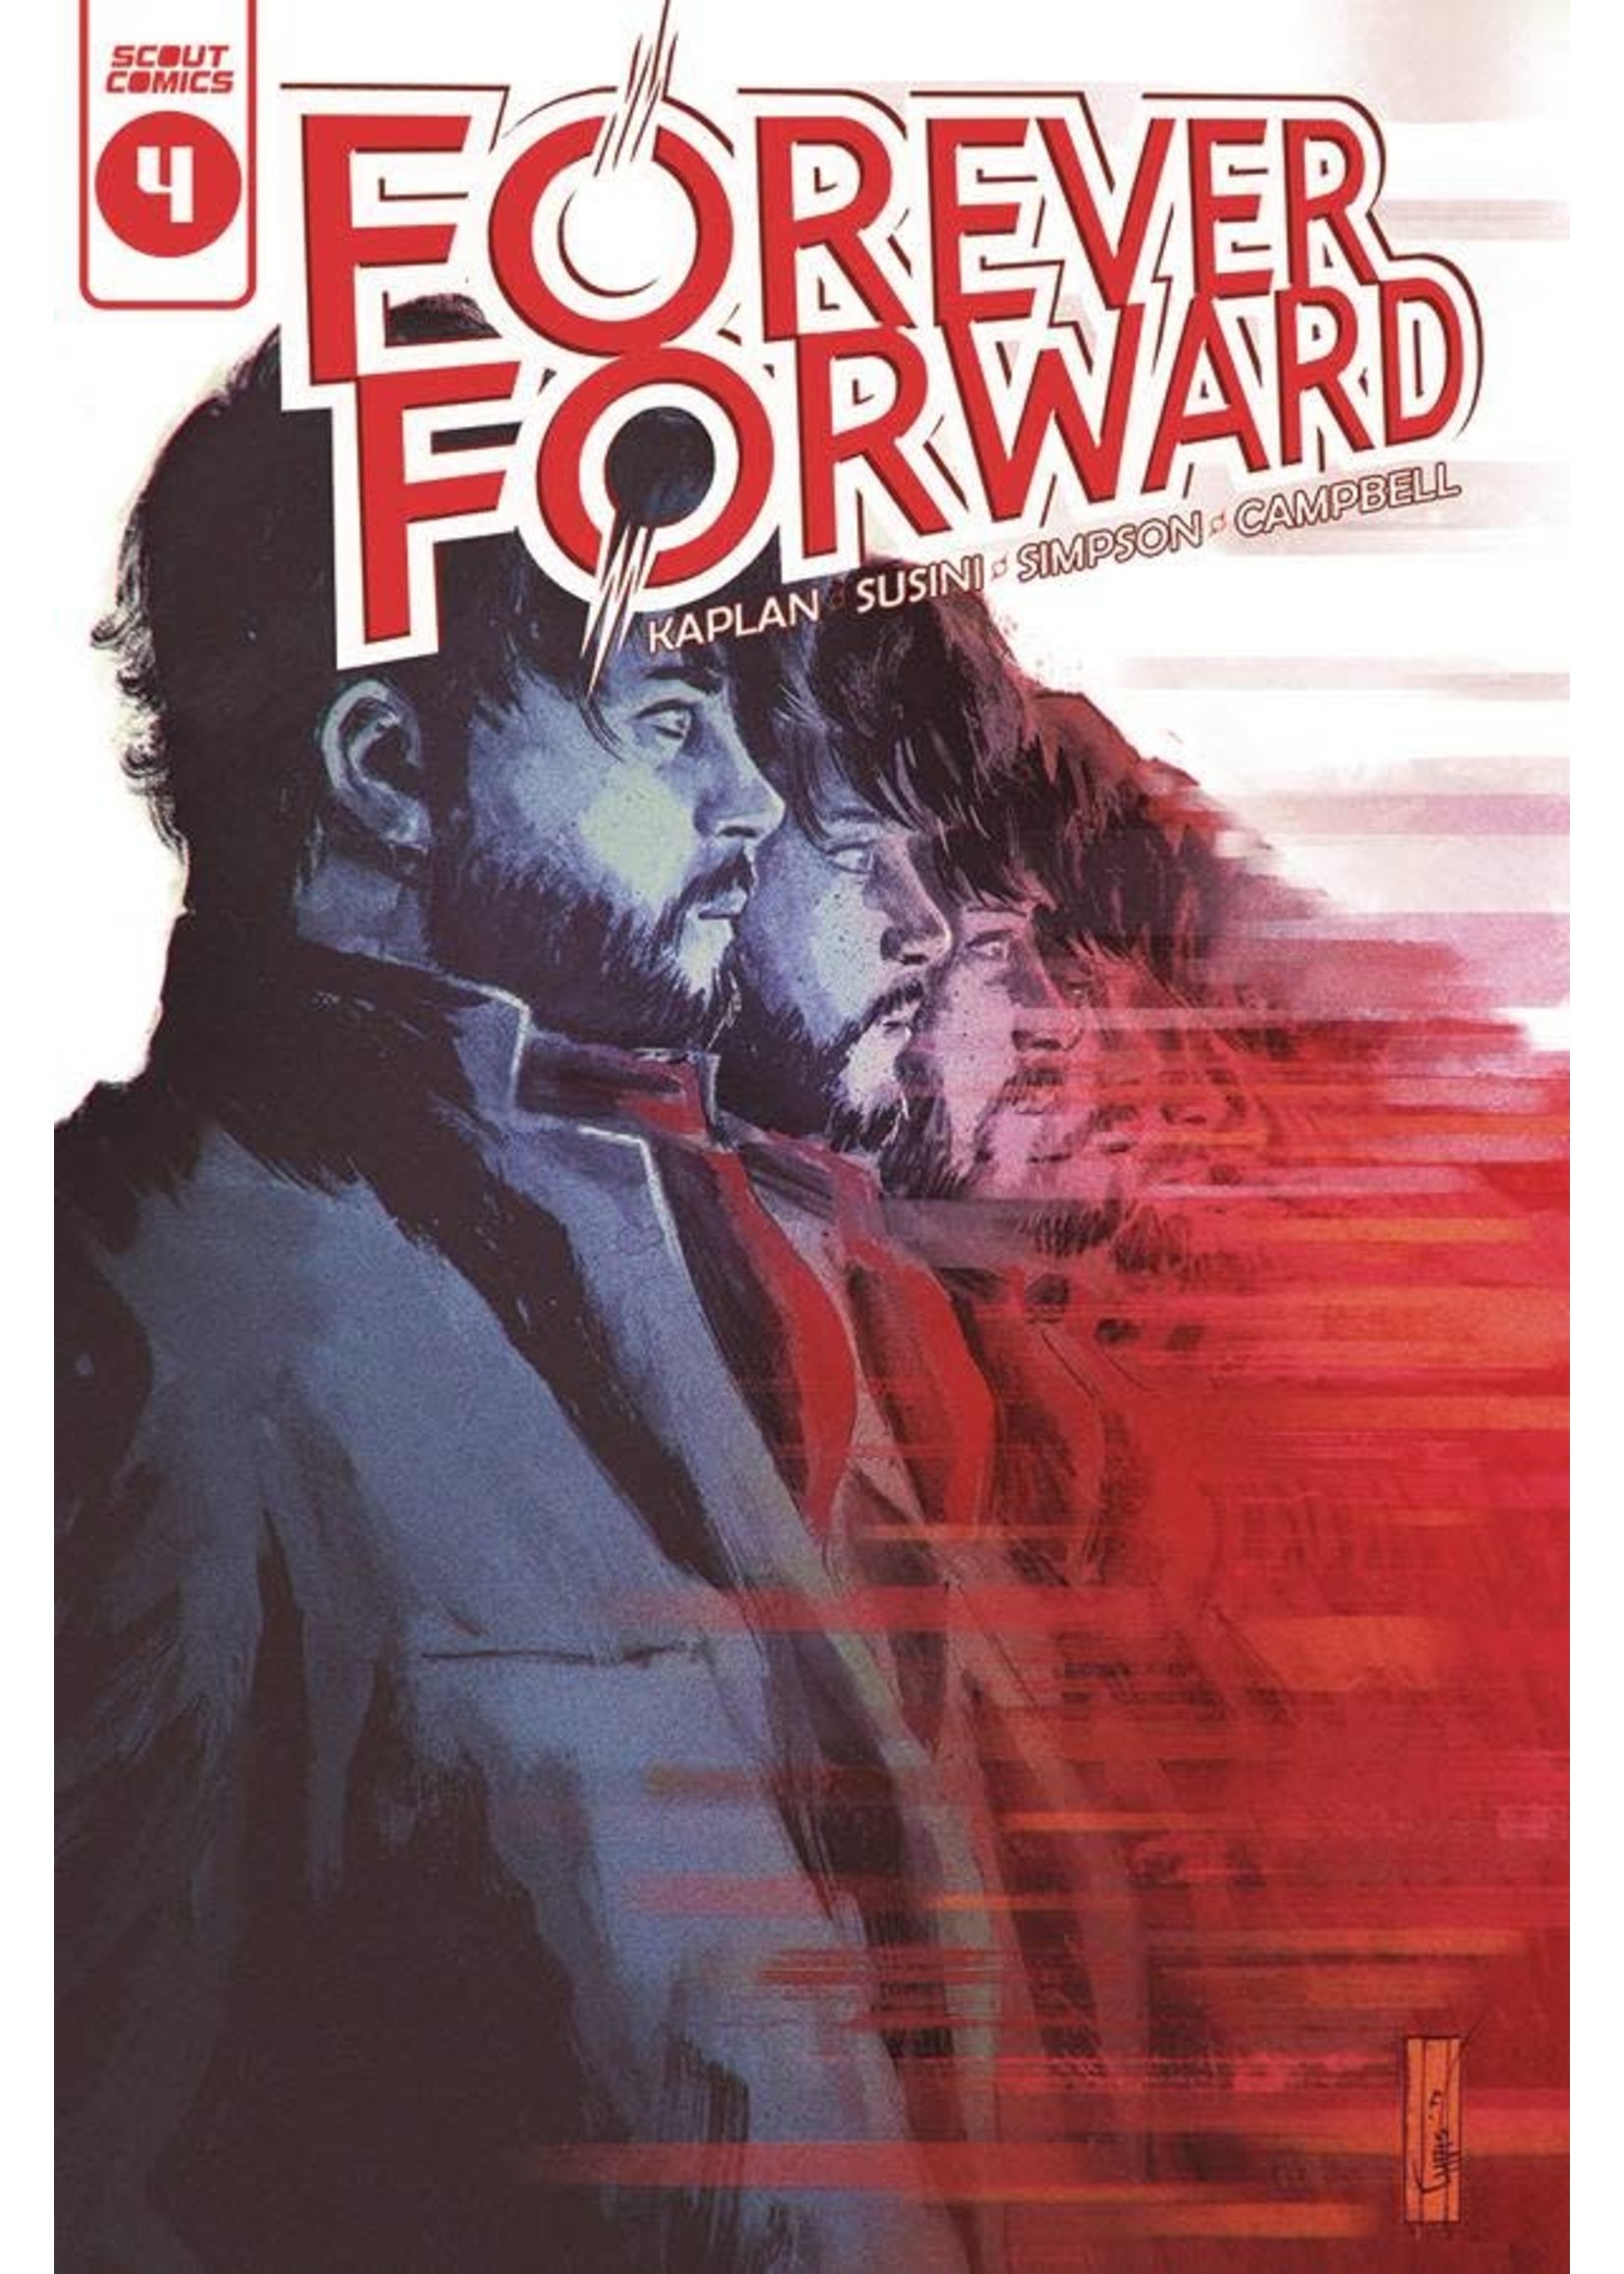 SCOUT COMICS FOREVER FORWARD complete 5 issue series